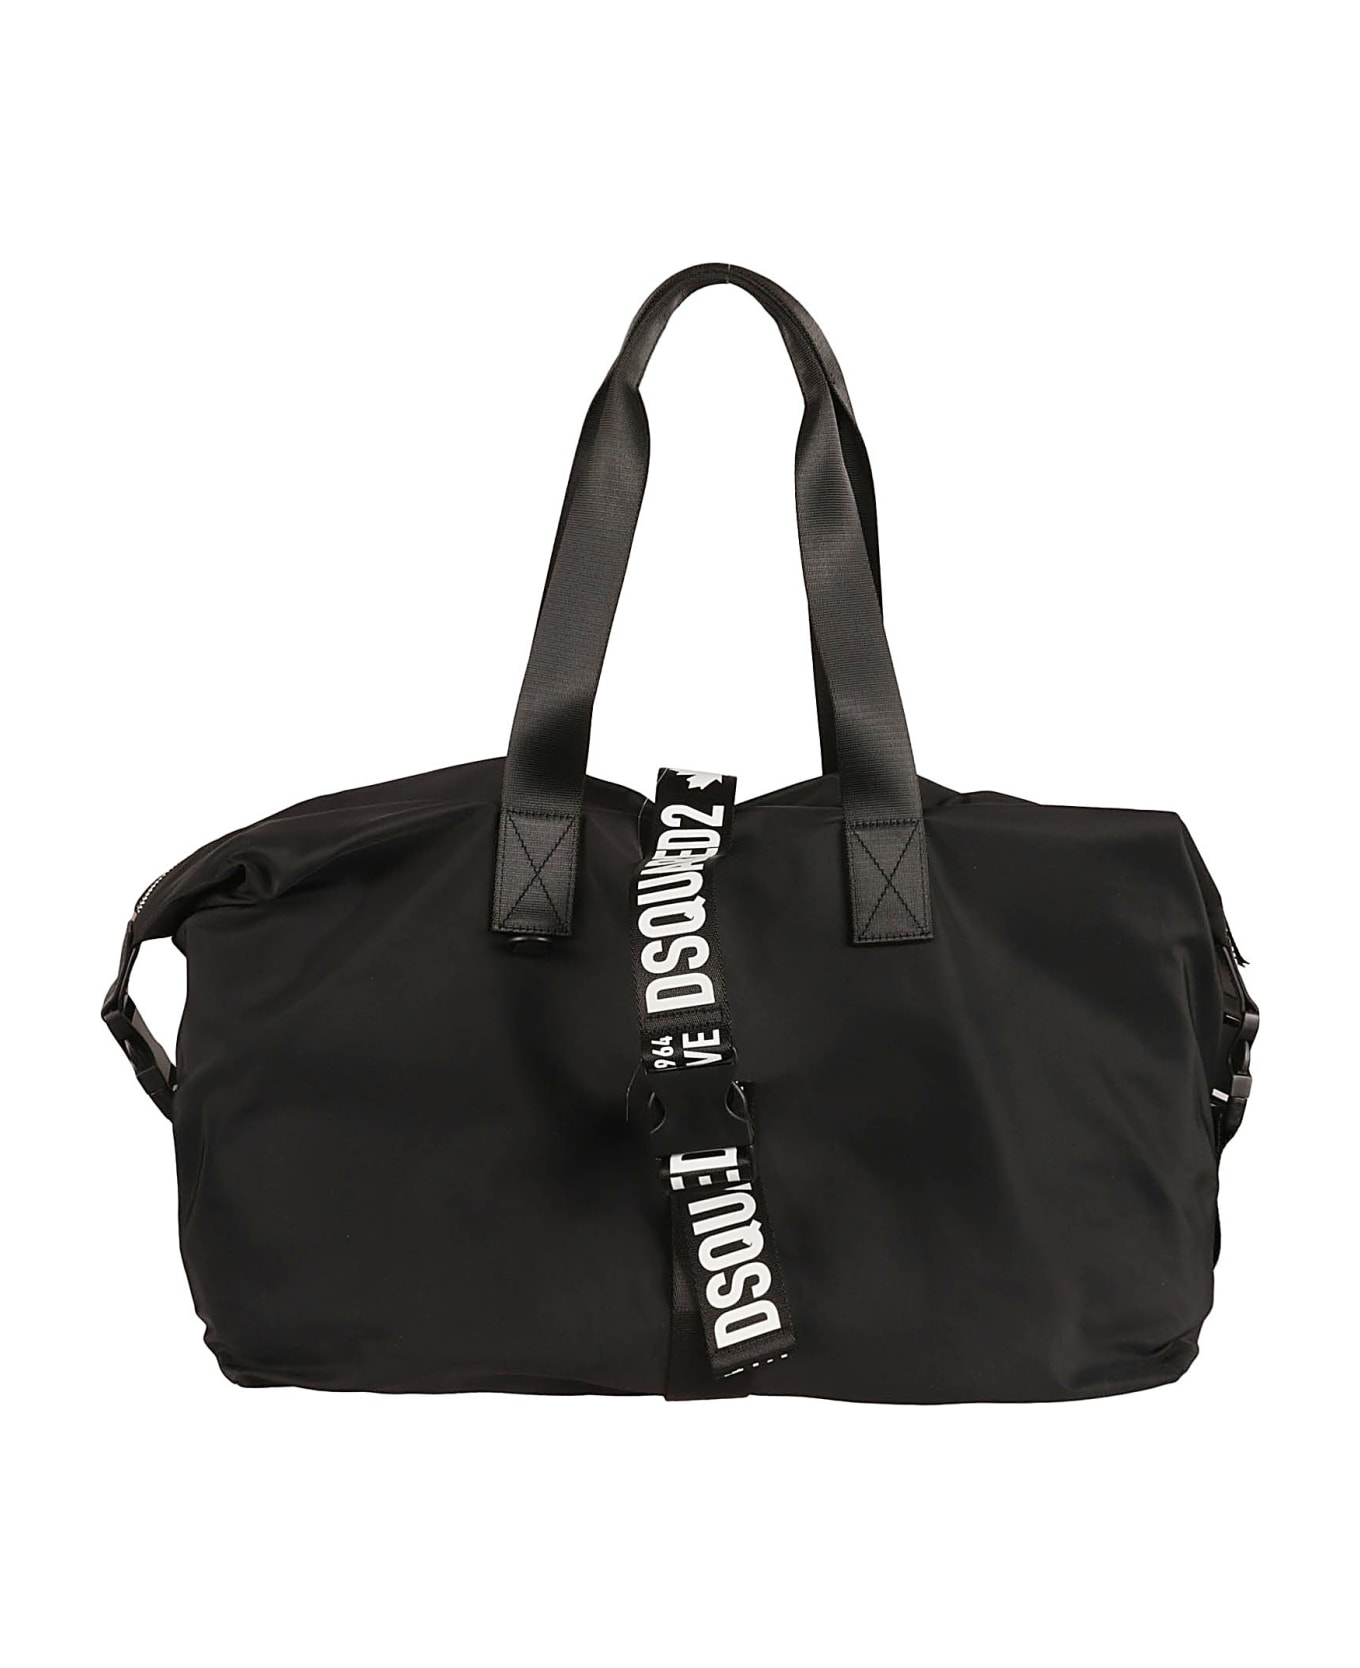 Dsquared2 Made With Love Duffle Bag